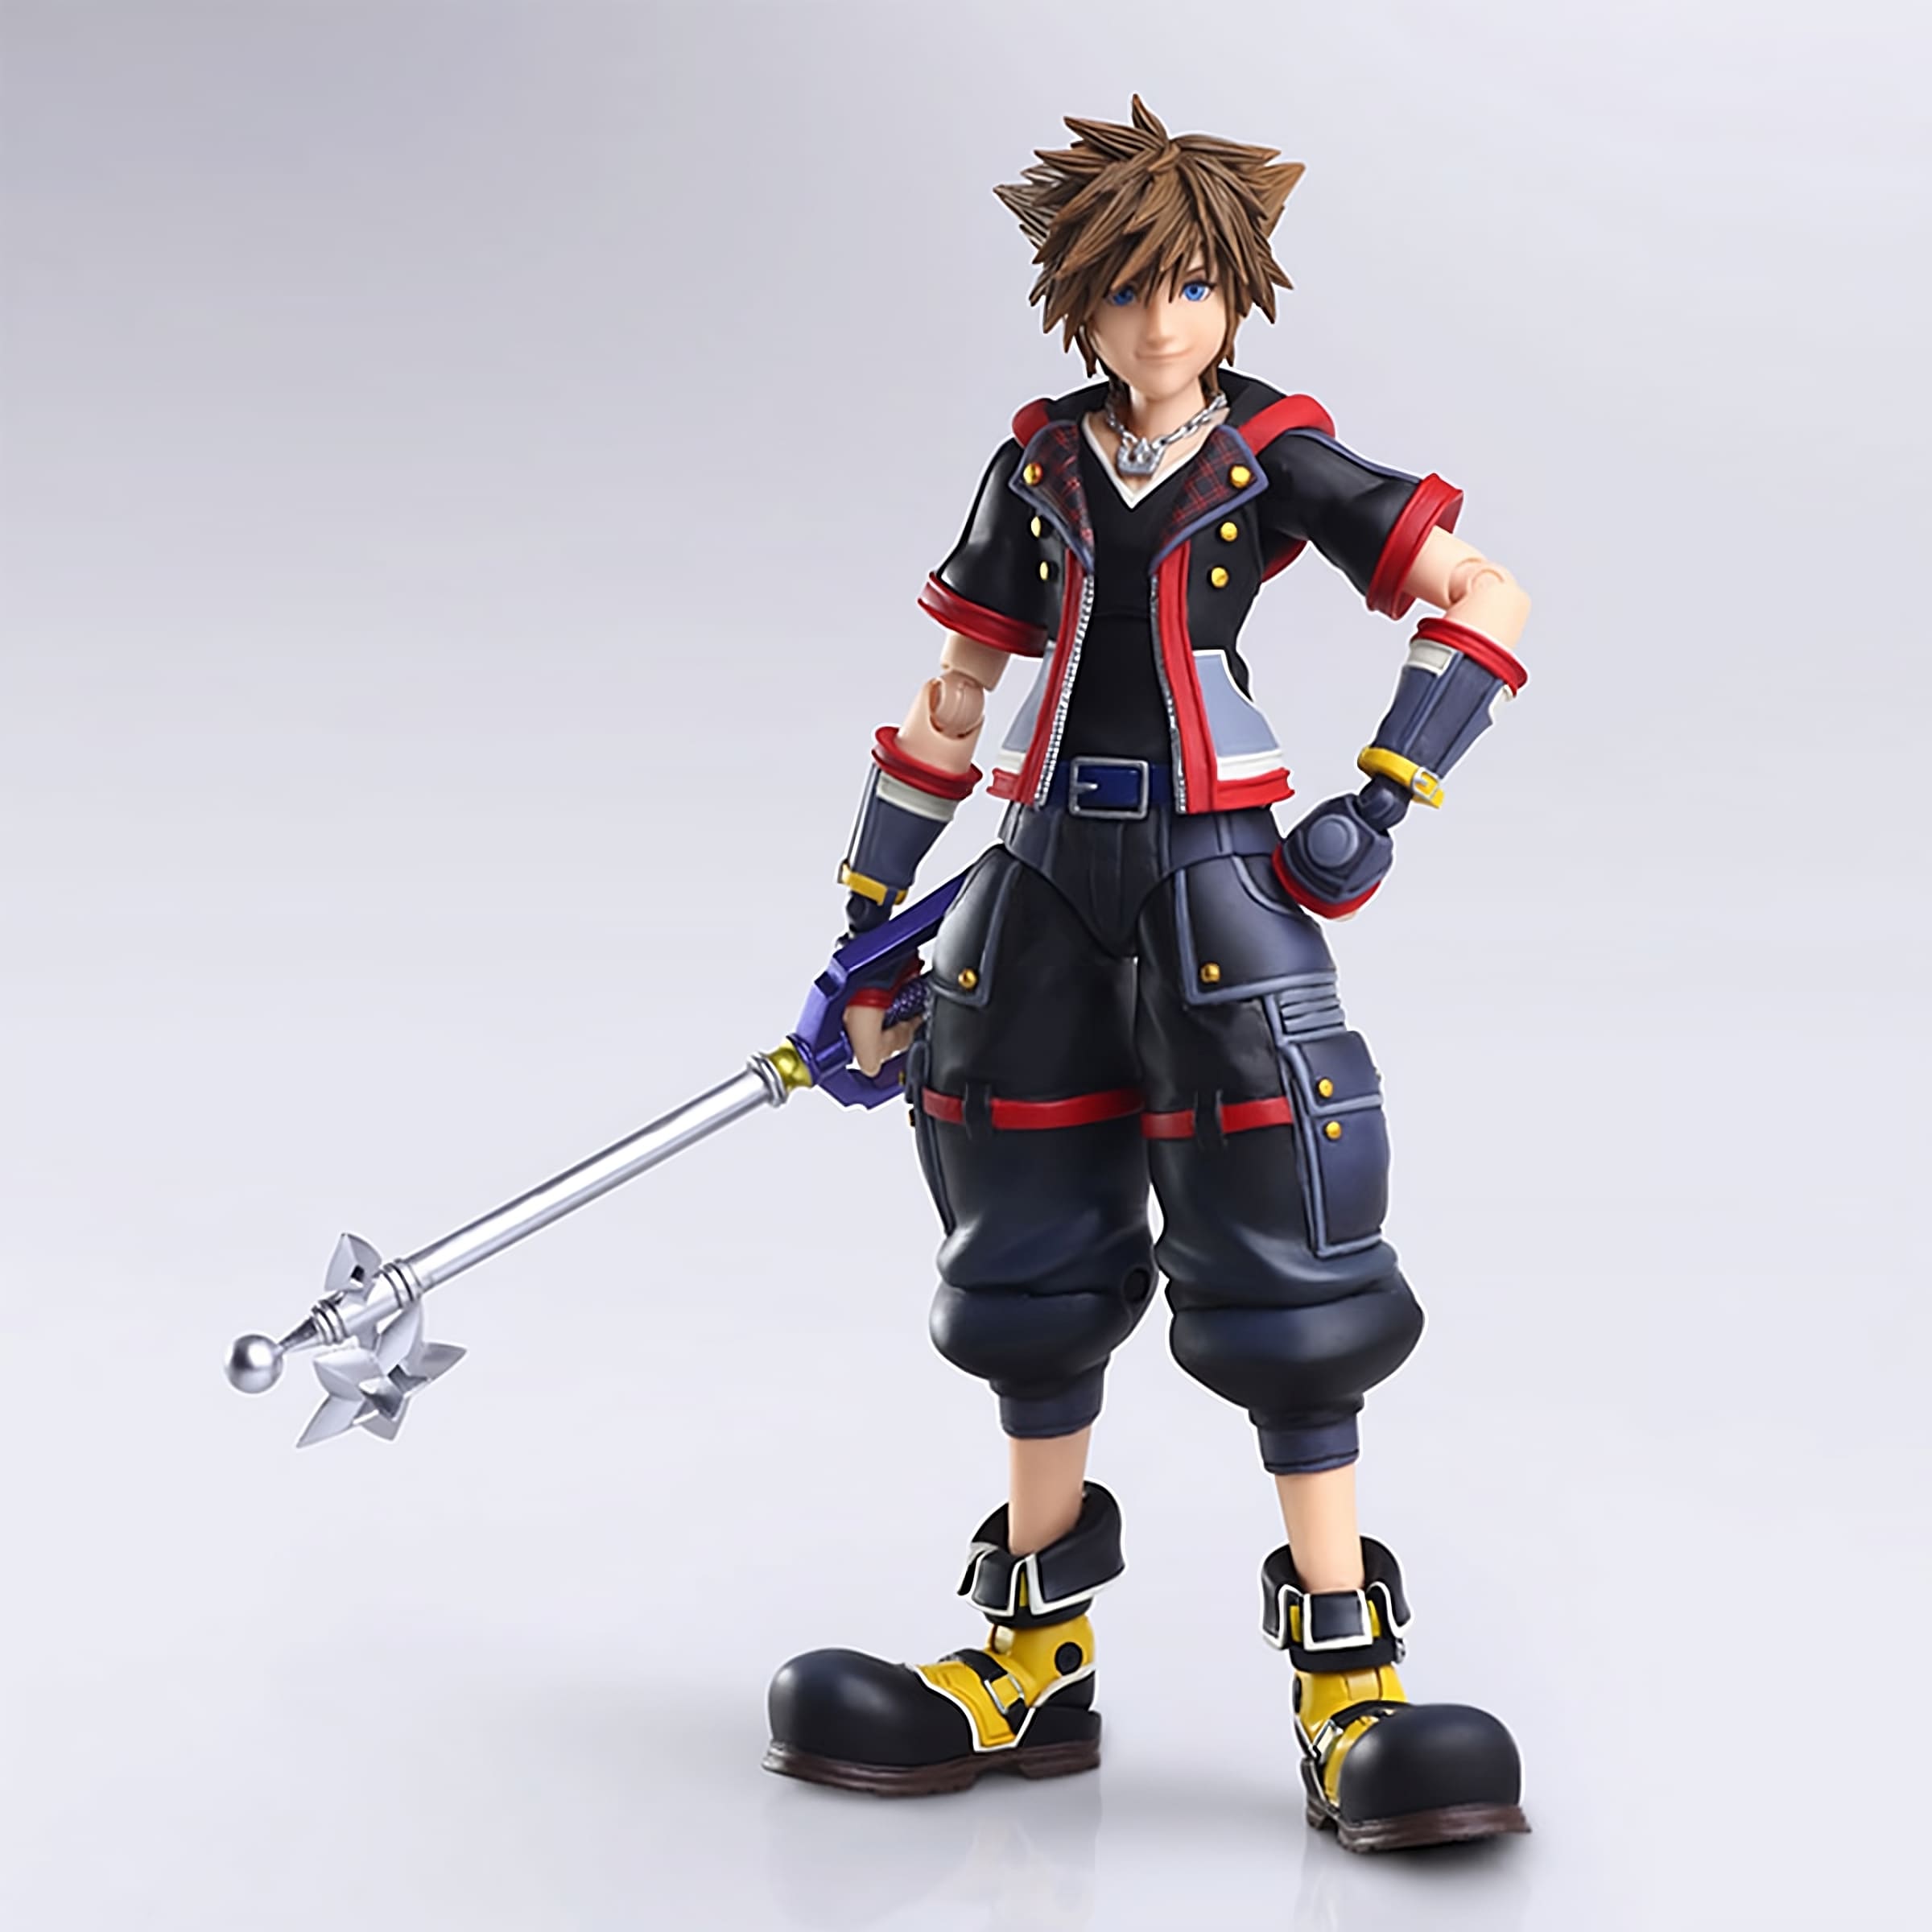 Kingdom Hearts,  Sora,  Action Figure,  Toy,  Collectible,  Square Enix,  Disney,  RPG,  Video Game,  Keyblade Master